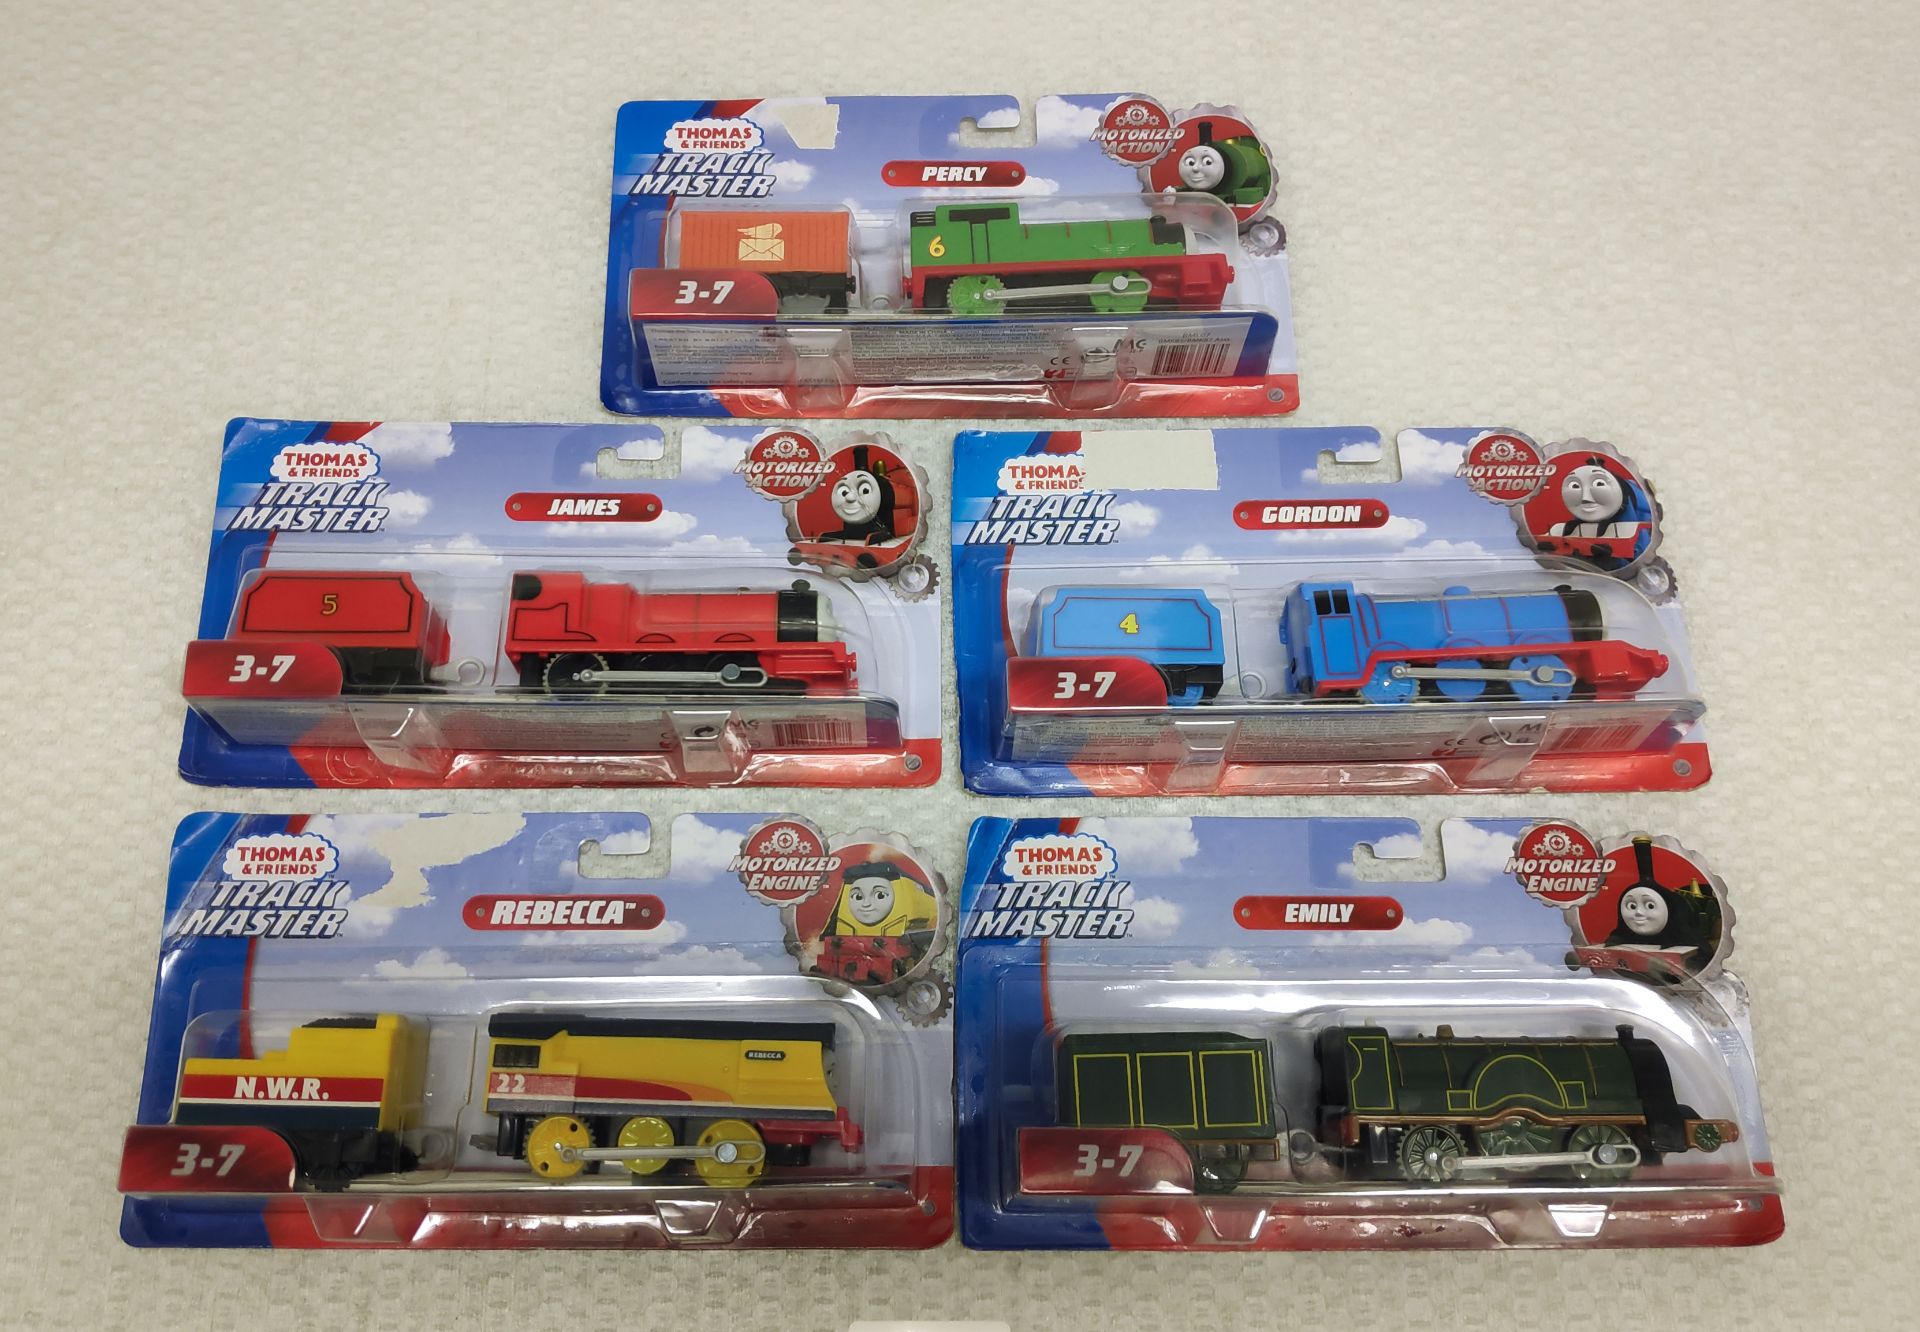 5 x Thomas & Friends Trackmaster Trains - Percy, Gordon, James, Emily and Rebecca - New/Boxed - HTYS